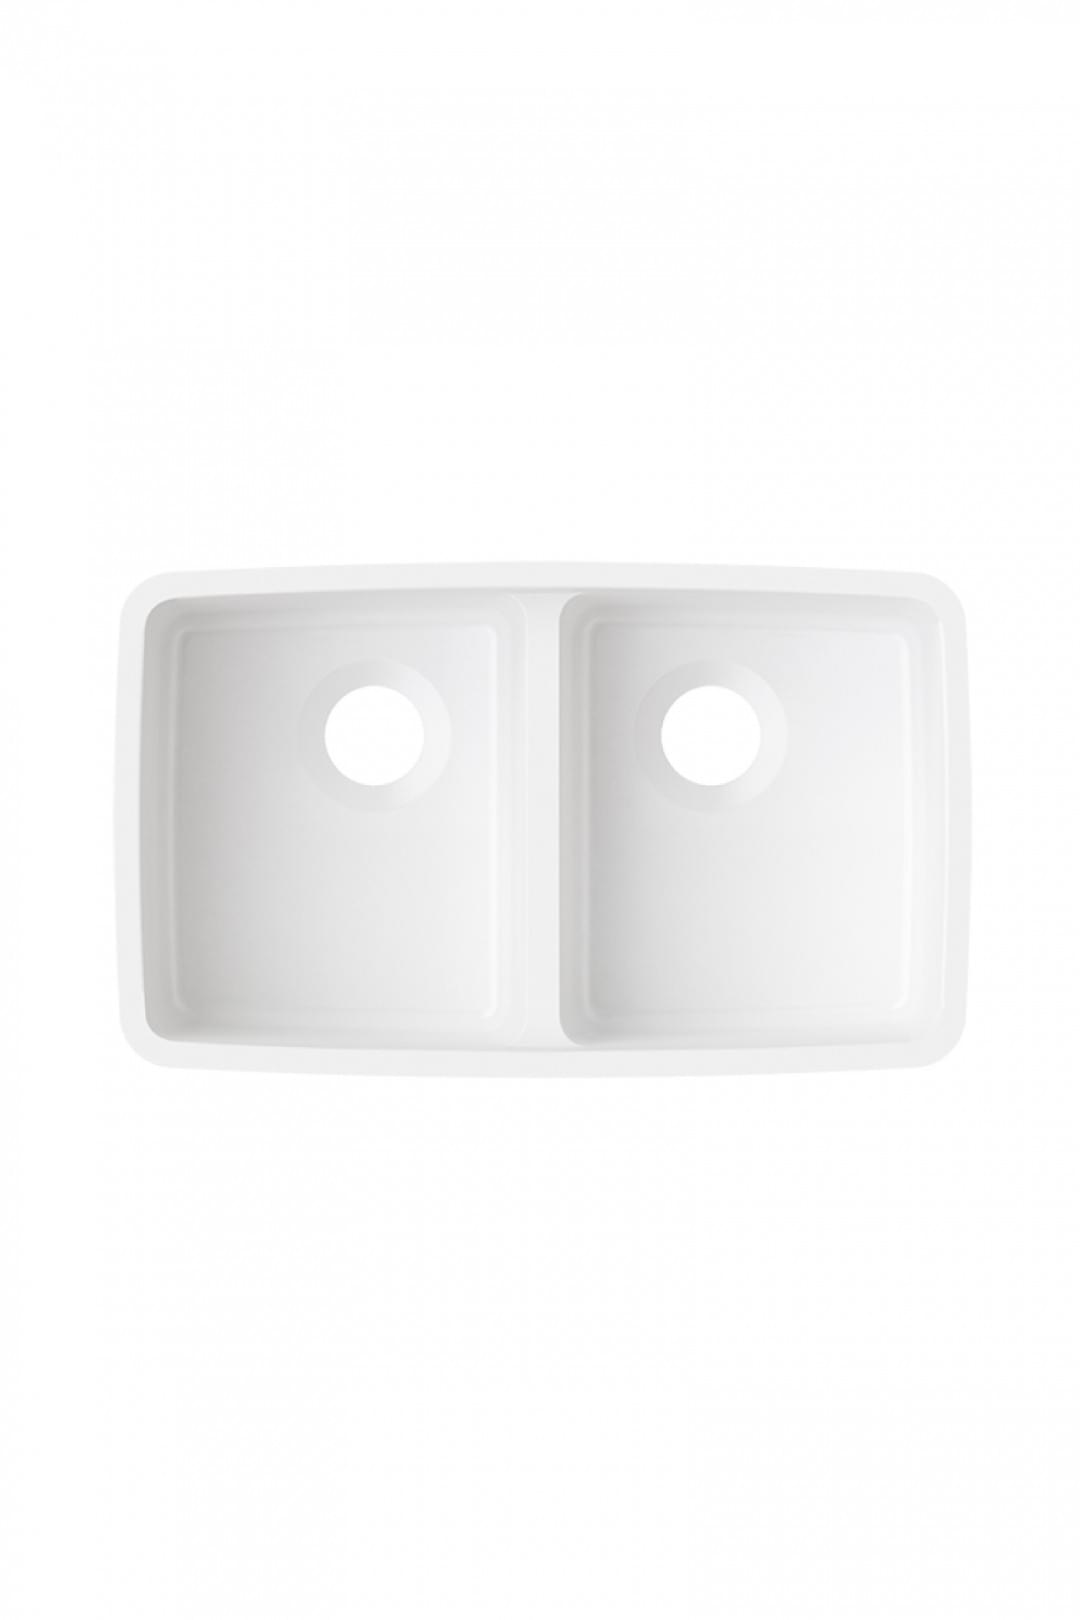 Double Sink - 850 from Corian® Solid Surfaces